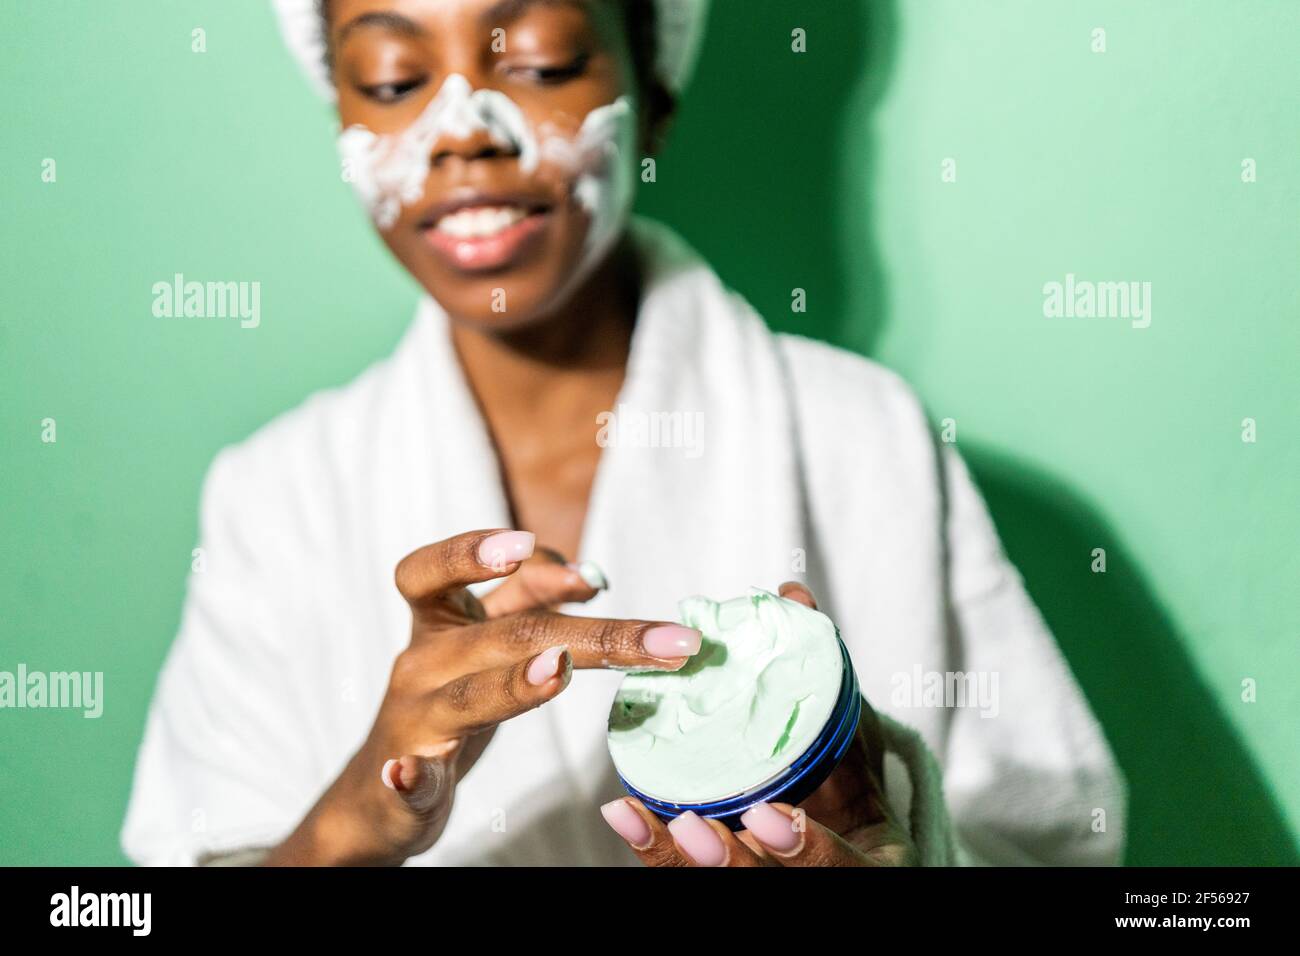 Woman using beauty product while standing against green background Stock Photo